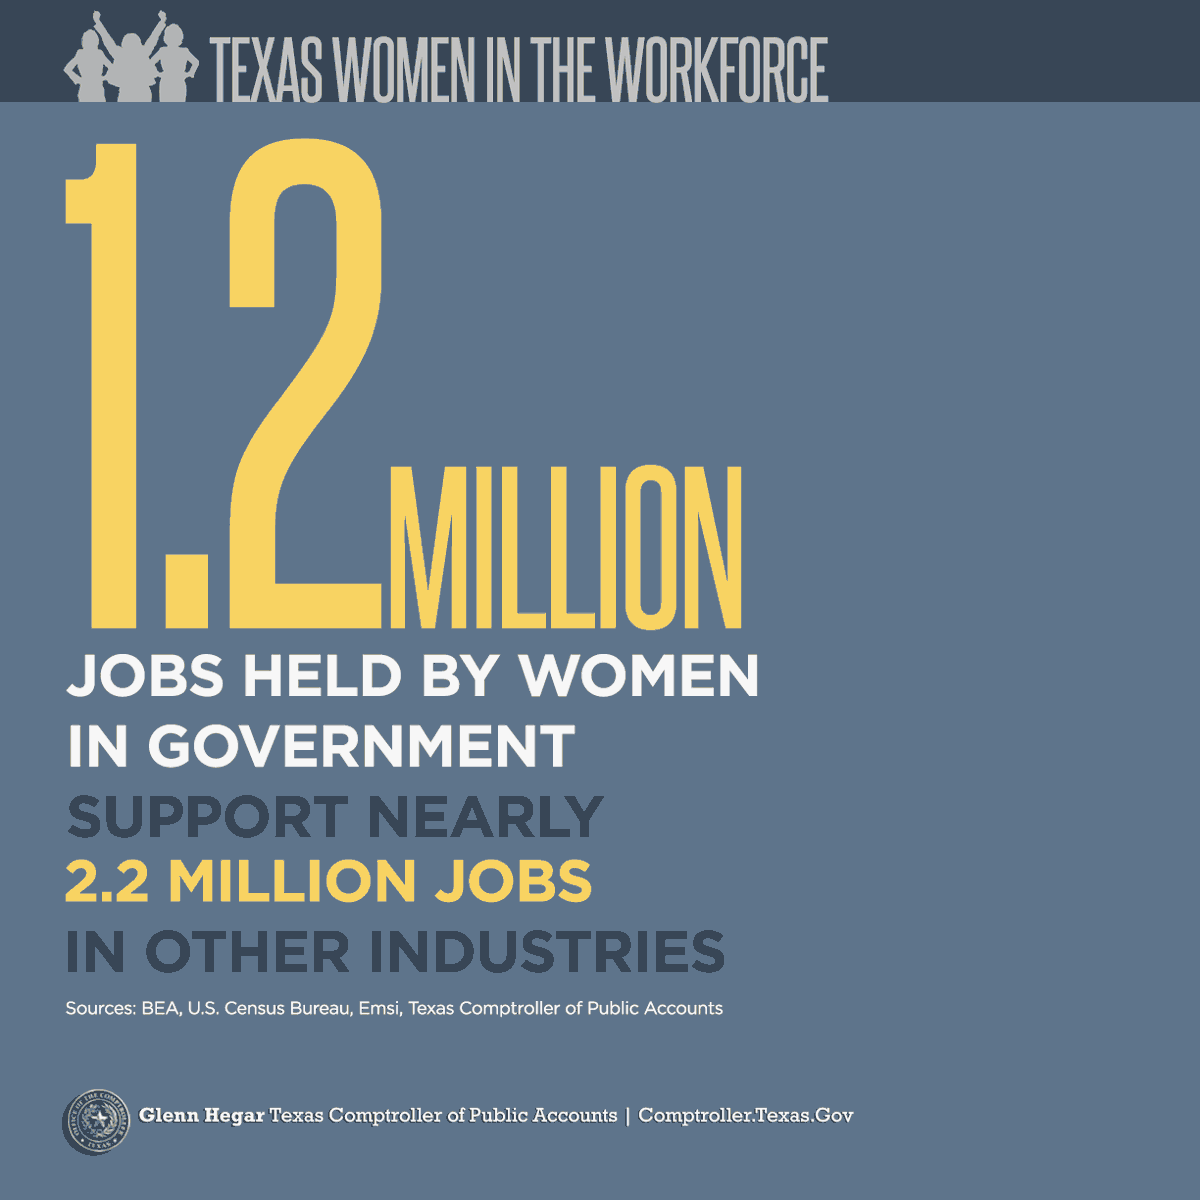 Texas Women in the Workforce - 
1.2 million jobs held by women in government support nearly 2.2 million jobs in other industries.
Sources: BEA, U.S. Census Bureau, Emsi, Texas Comptroller of Public Accounts